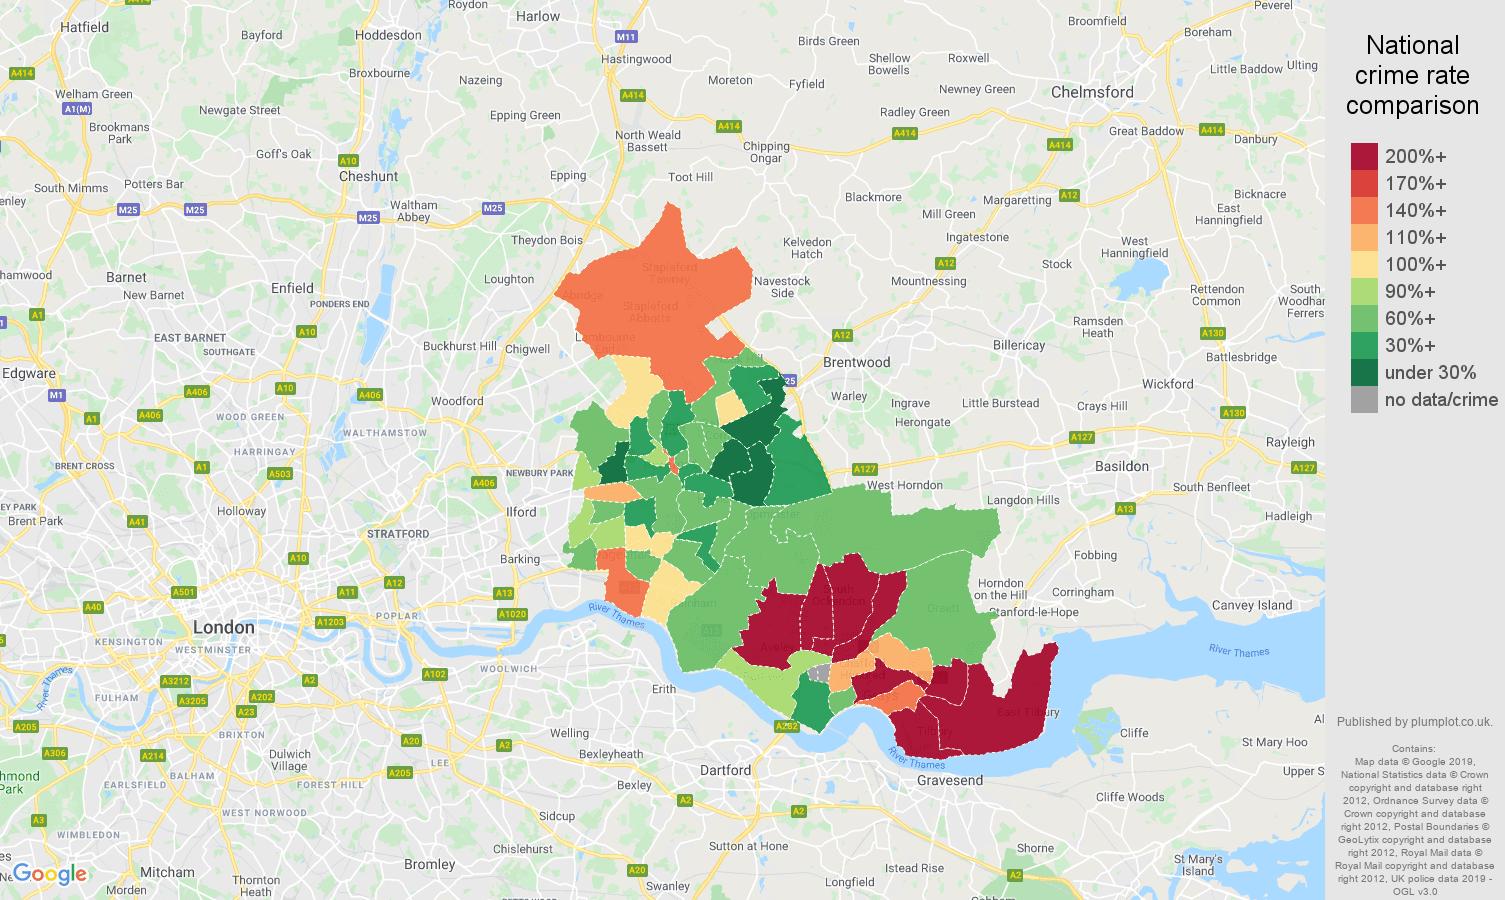 Romford other crime rate comparison map